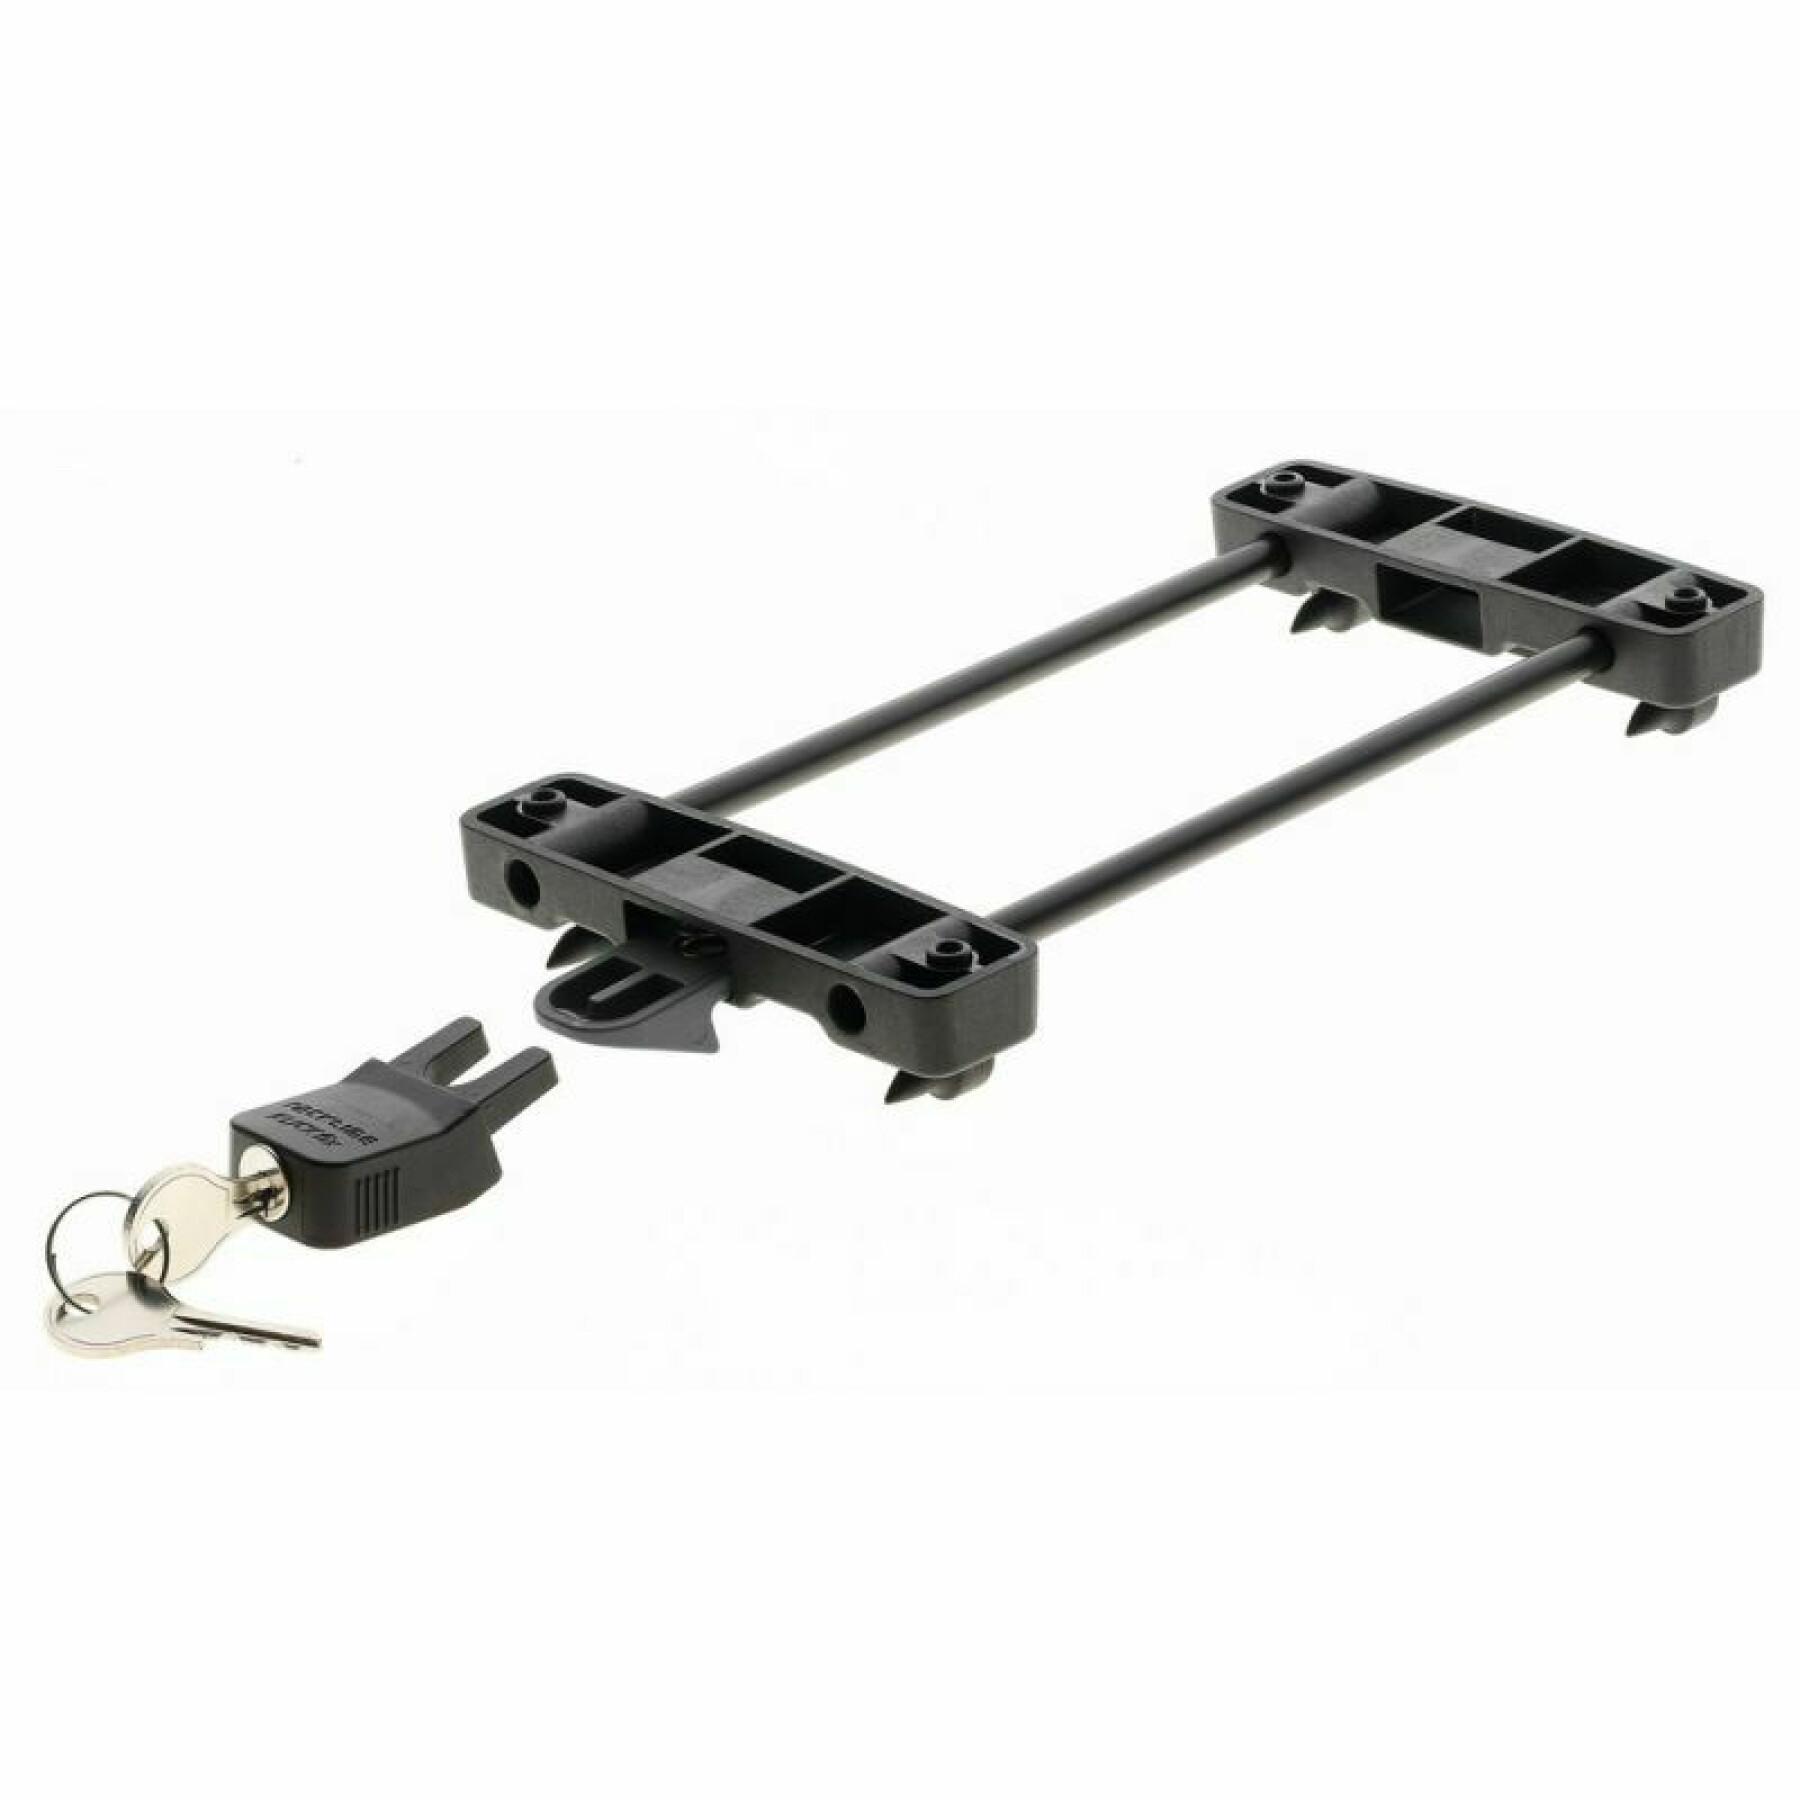 Luggage rack adapter without lock Tubus racktime snapit